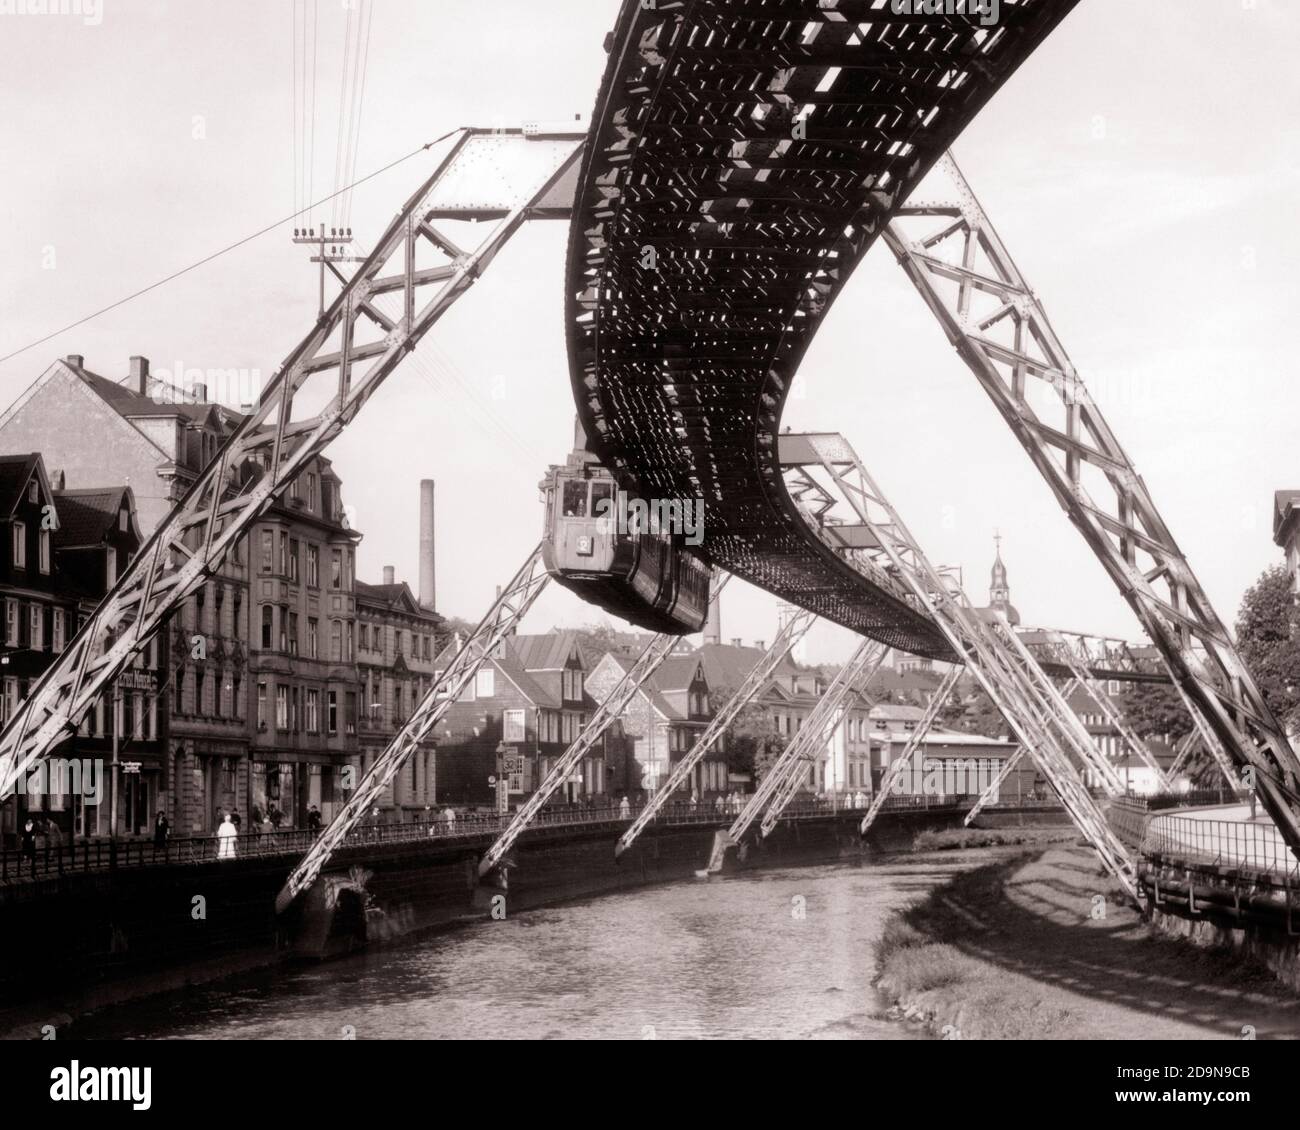 1930s WUPPERTAL SCHWEBEGAHN ELEVATED MONORAIL SKYTRAIN OVER WUPPER RIVER PREWAR WUPPERTAL GERMANY - r6987 HAR001 HARS OLDEST SUSPENSION Stock Photo